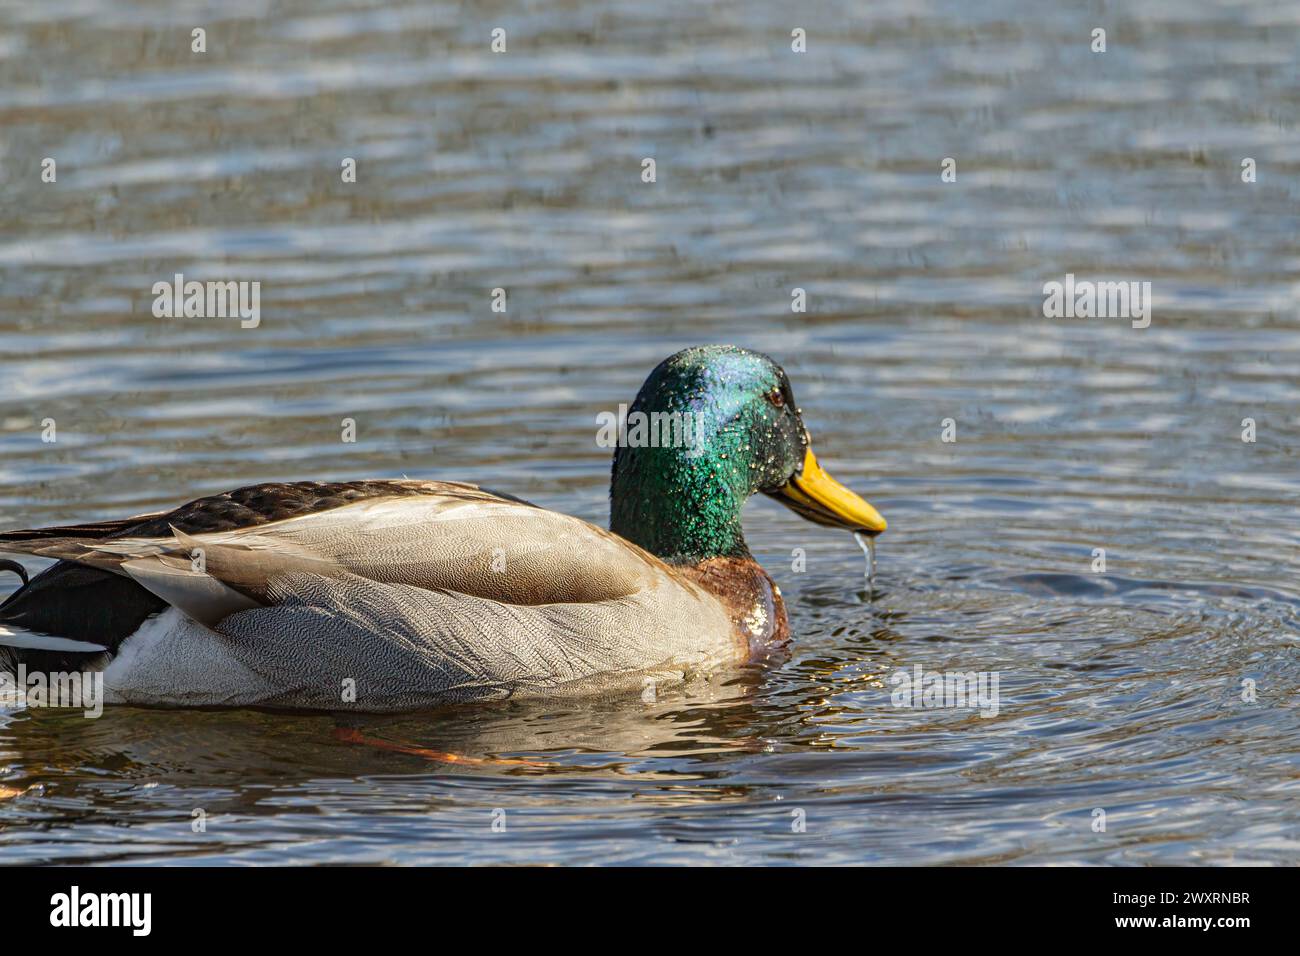 A solitary duck peacefully swimming in calm waters. Stock Photo